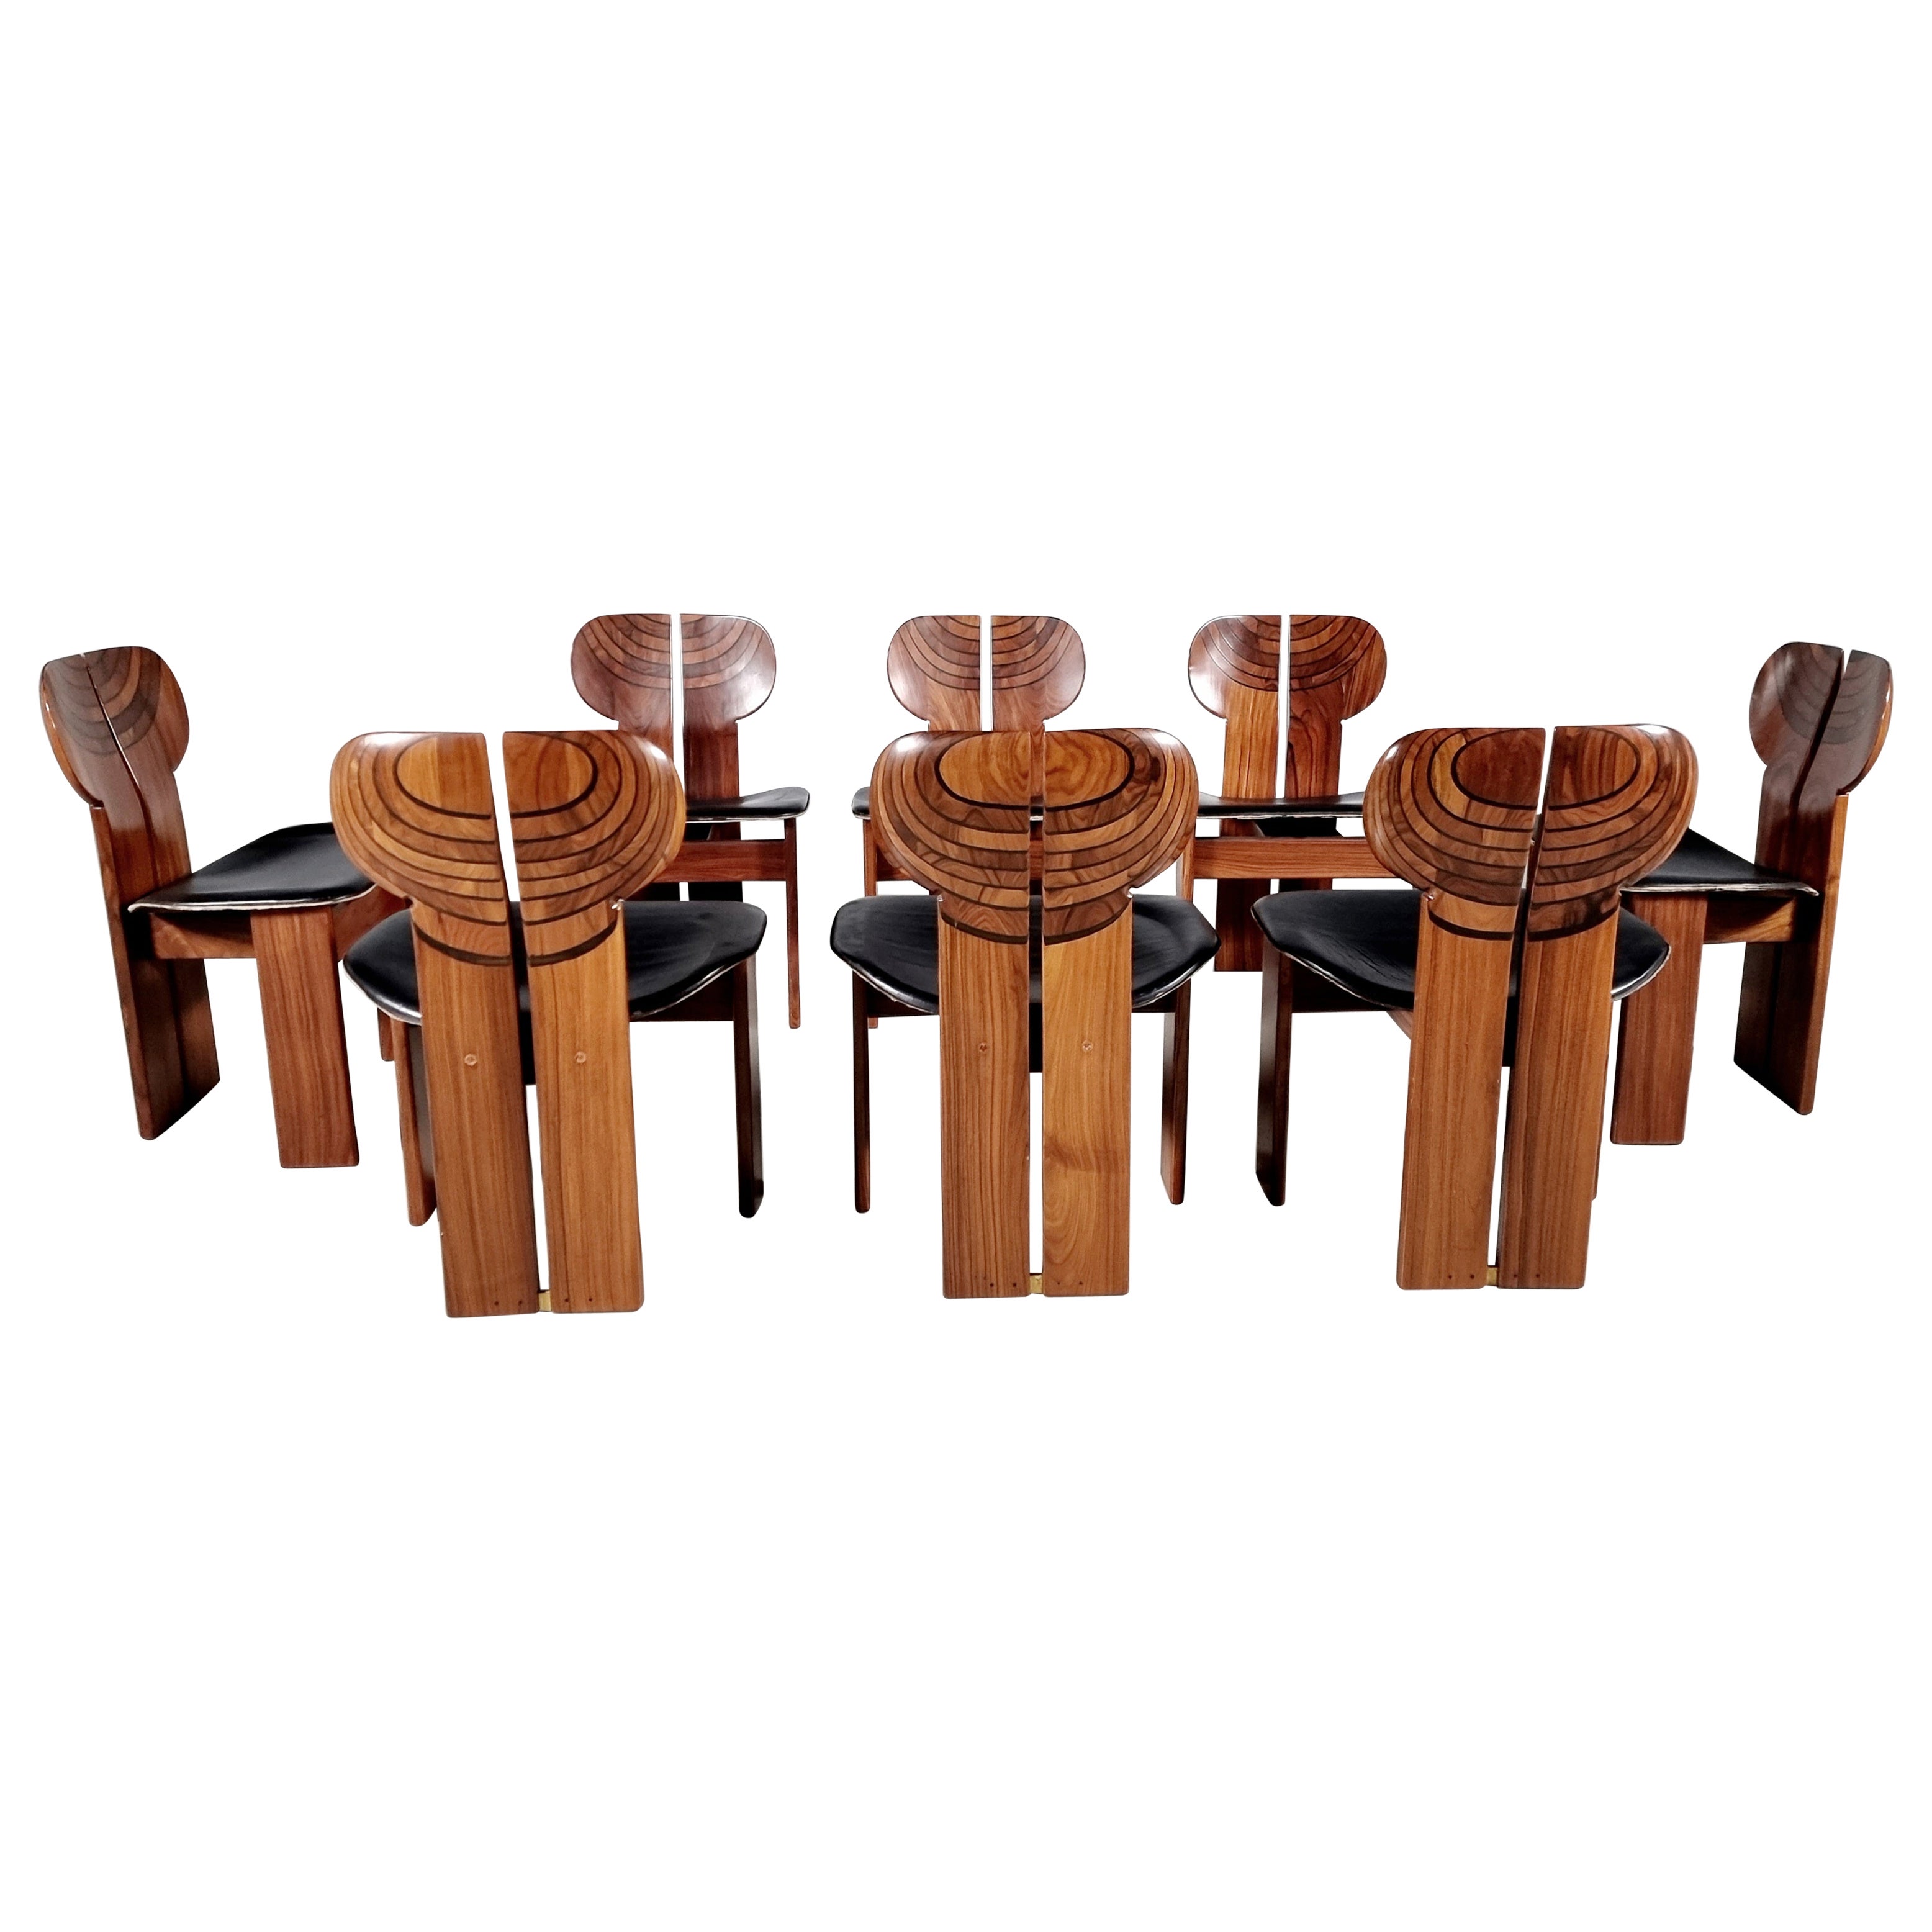 Artona Africa chairs, walnut wood and black leather, Afra and Tobia Scarpa